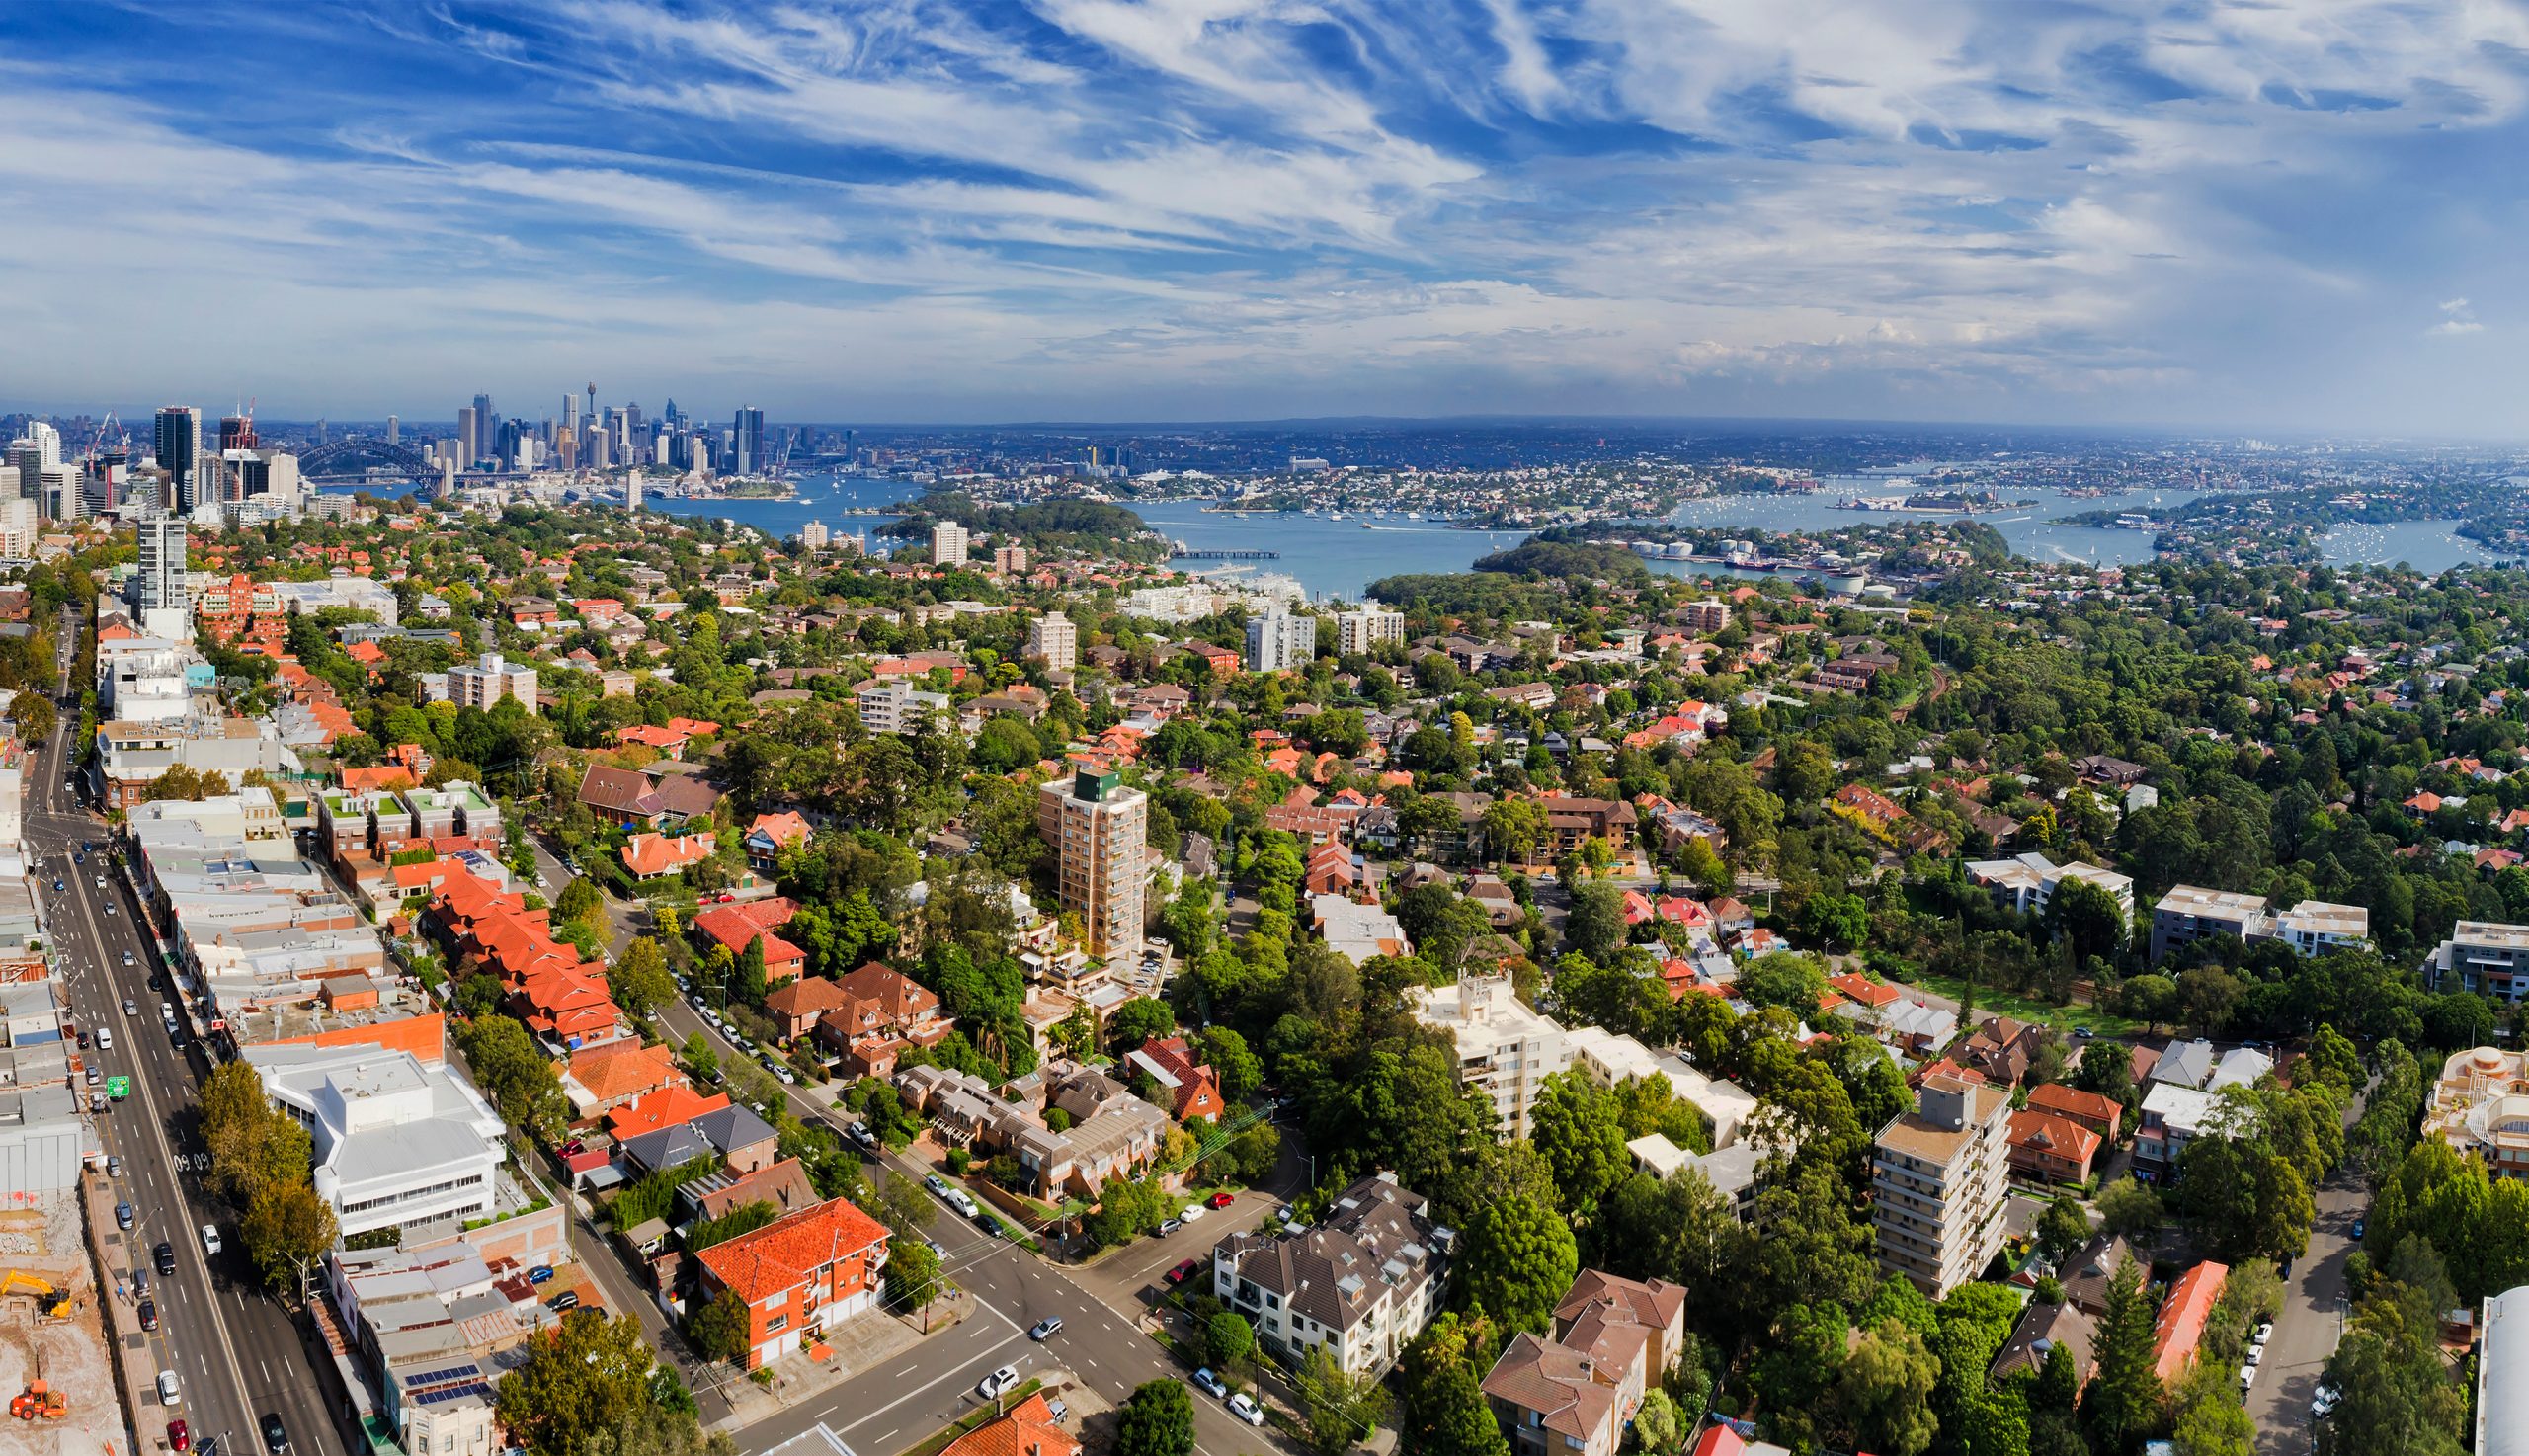 Stone Real Estate strongholds North Sydney’s market with newest Crows Nest office